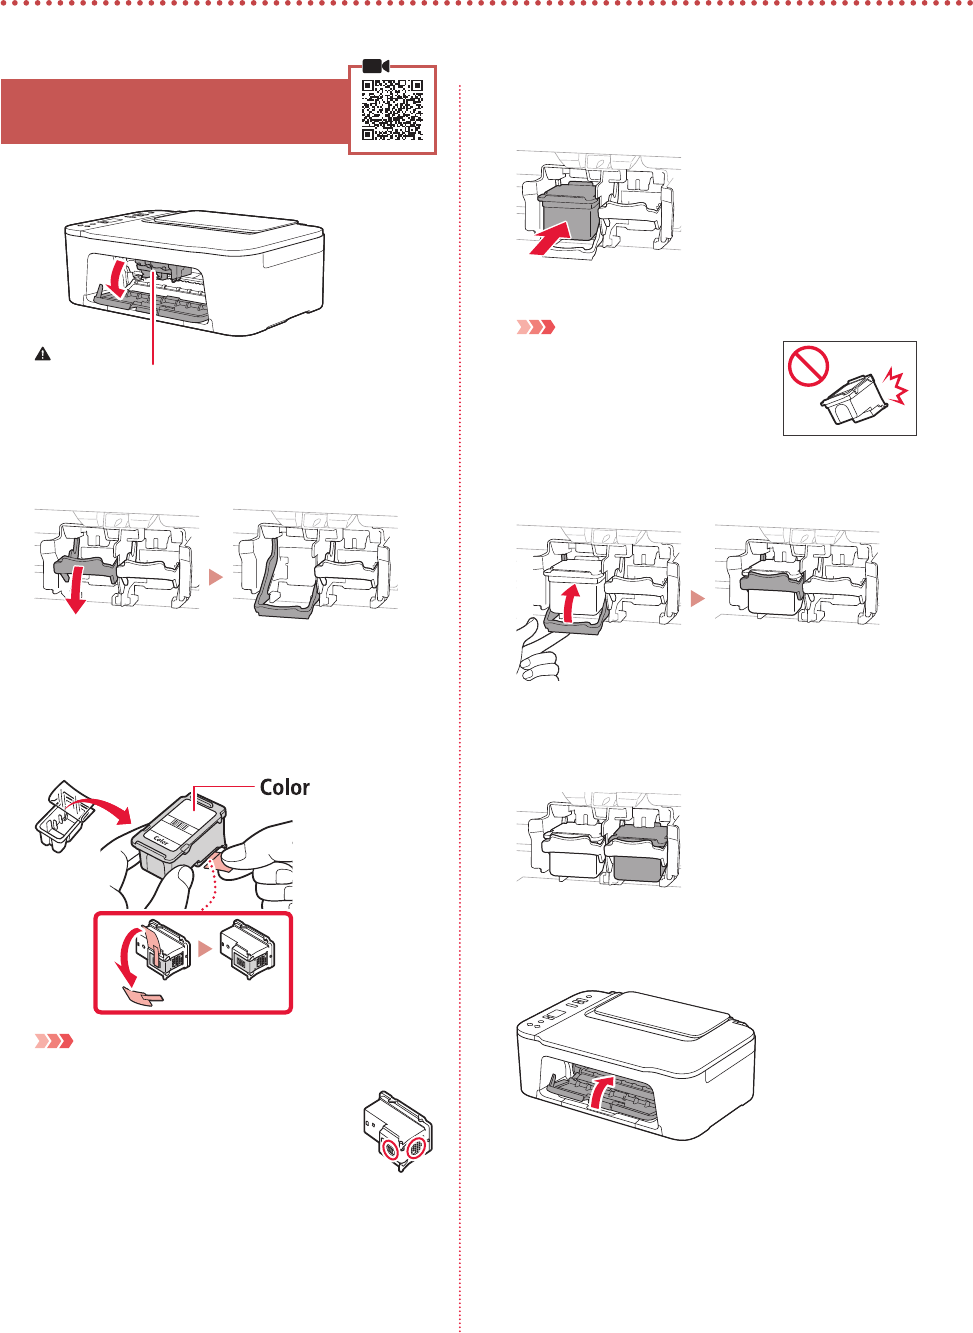 User manual Canon Pixma TS6051 (English - 448 pages)